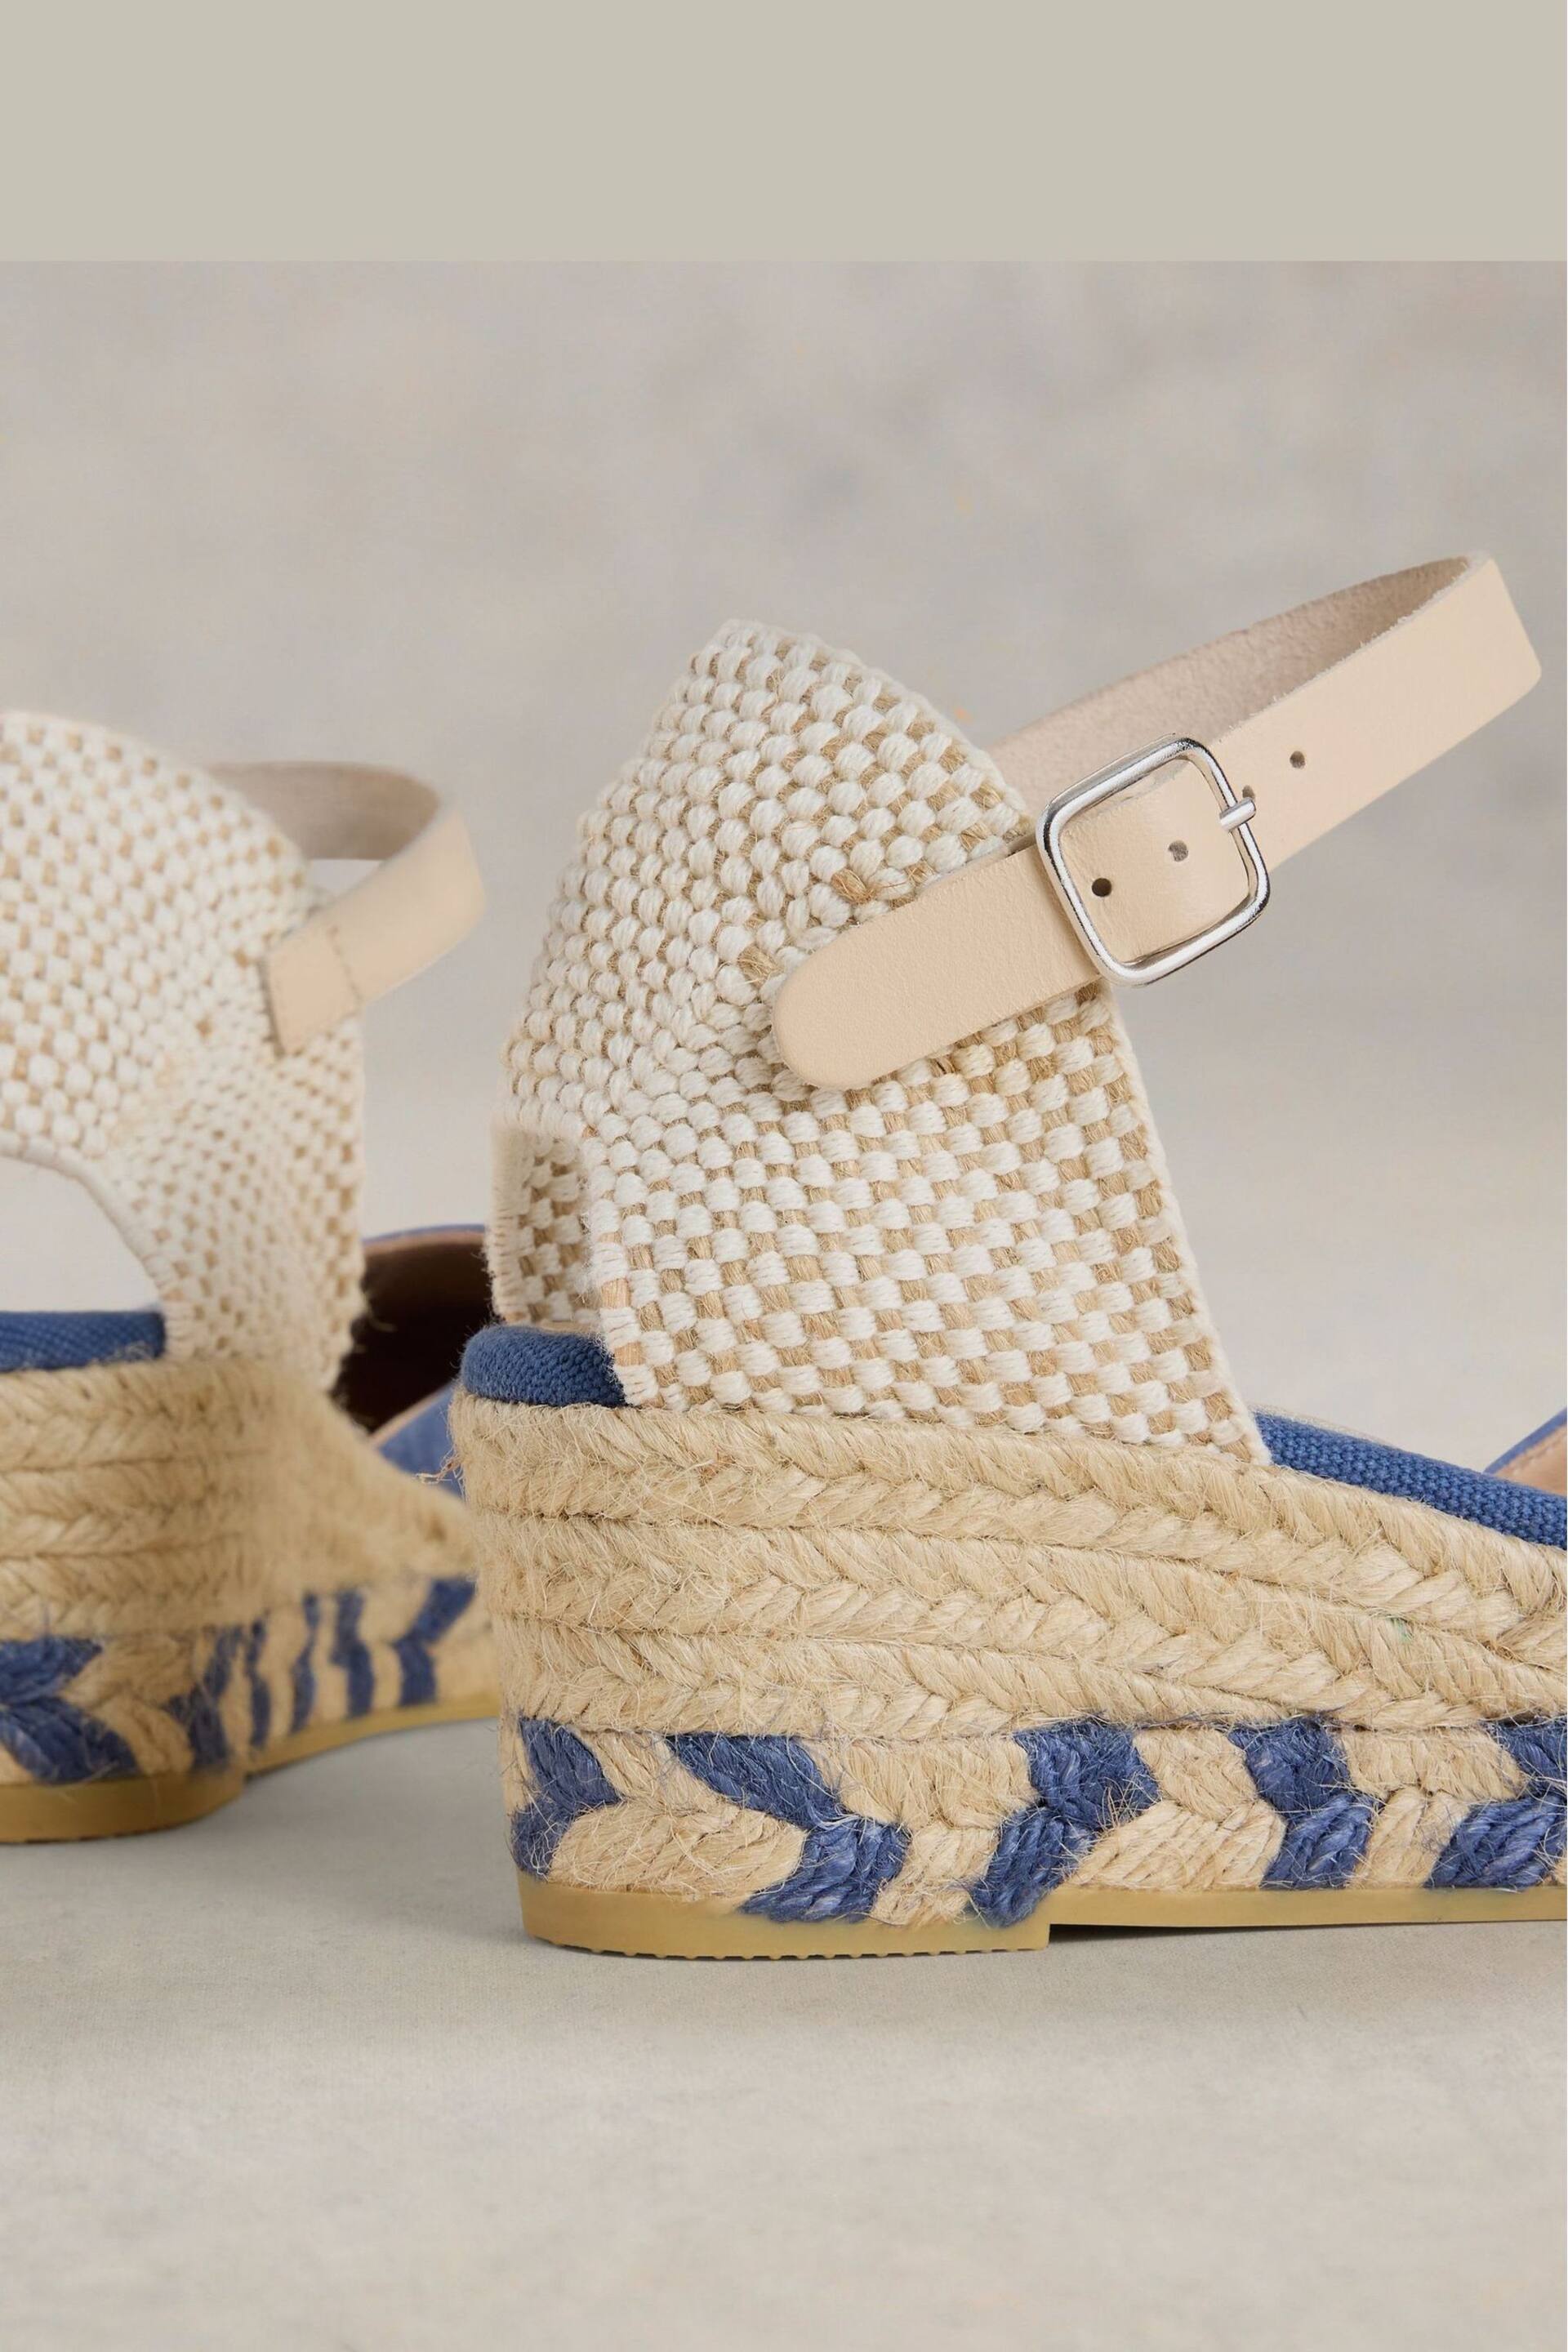 White Stuff Blue Suede Closed Espadrille Wedges - Image 4 of 4